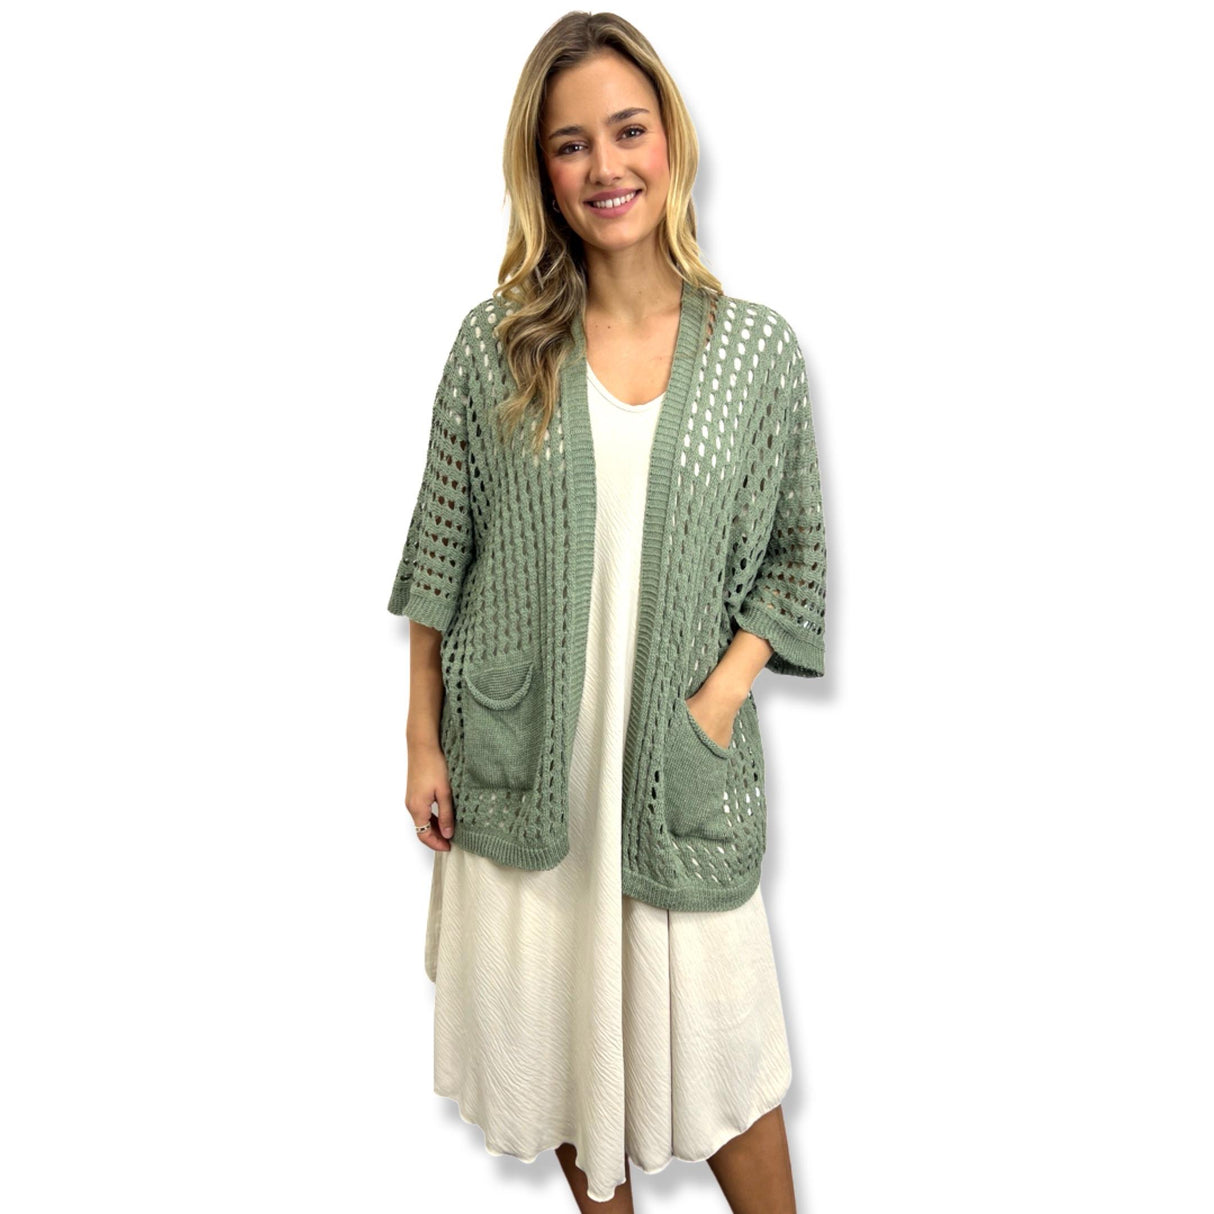 CROCHET CARDIGAN OVER HIP WITH 2 FRONT POCKETS 100% COTTON